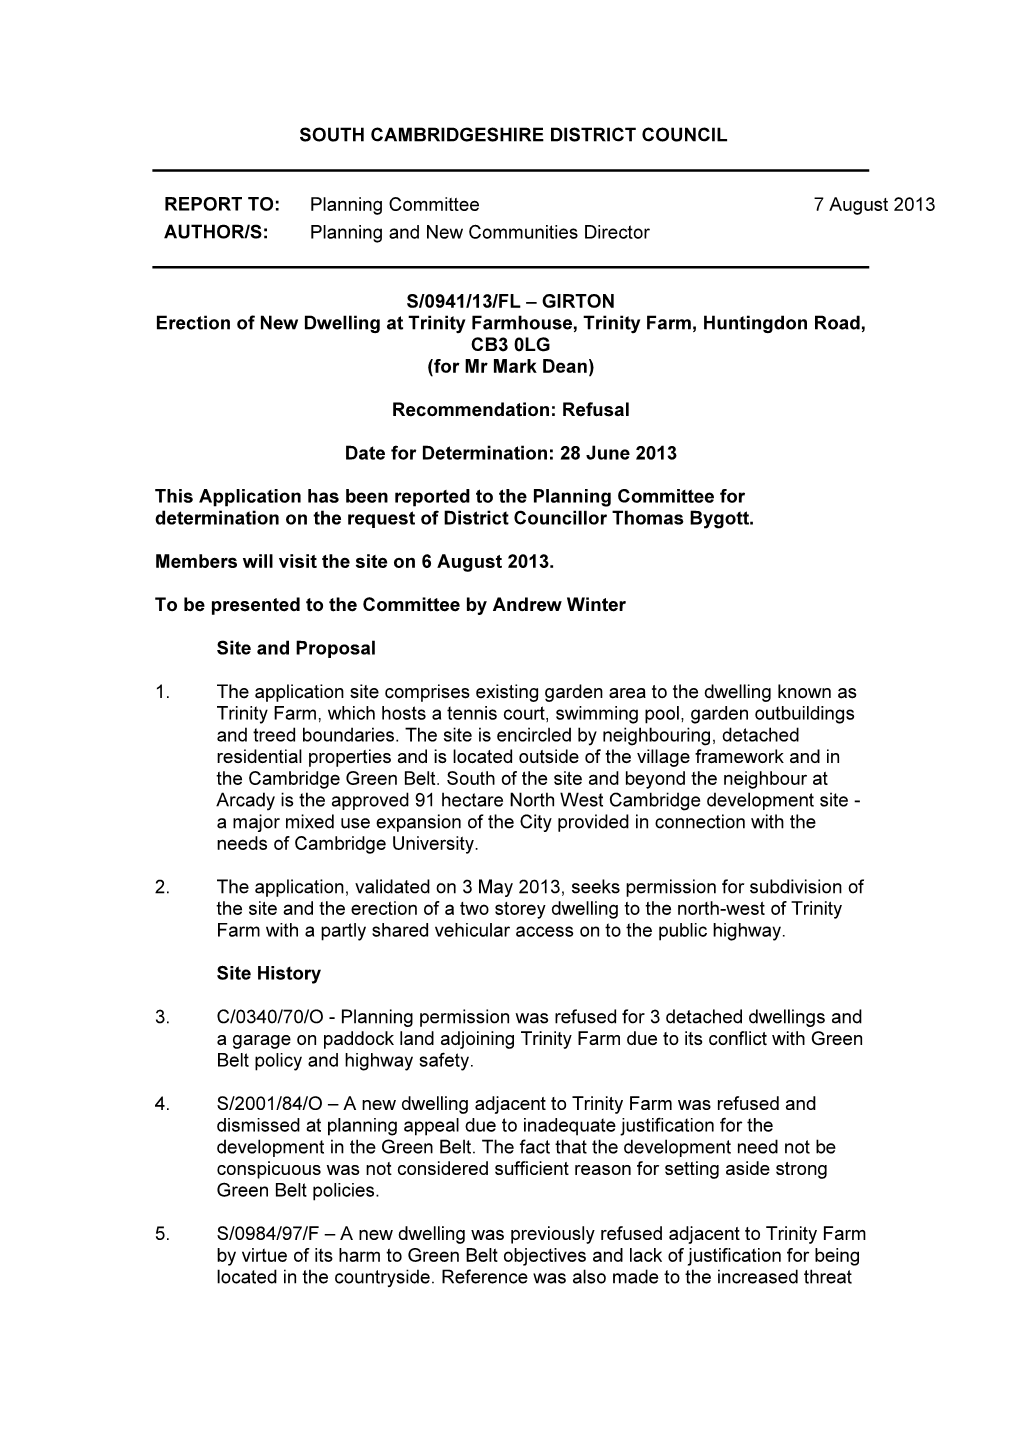 SOUTH CAMBRIDGESHIRE DISTRICT COUNCIL REPORT TO: Planning Committee 7 August 2013 AUTHOR/S: Planning and New Communities Directo